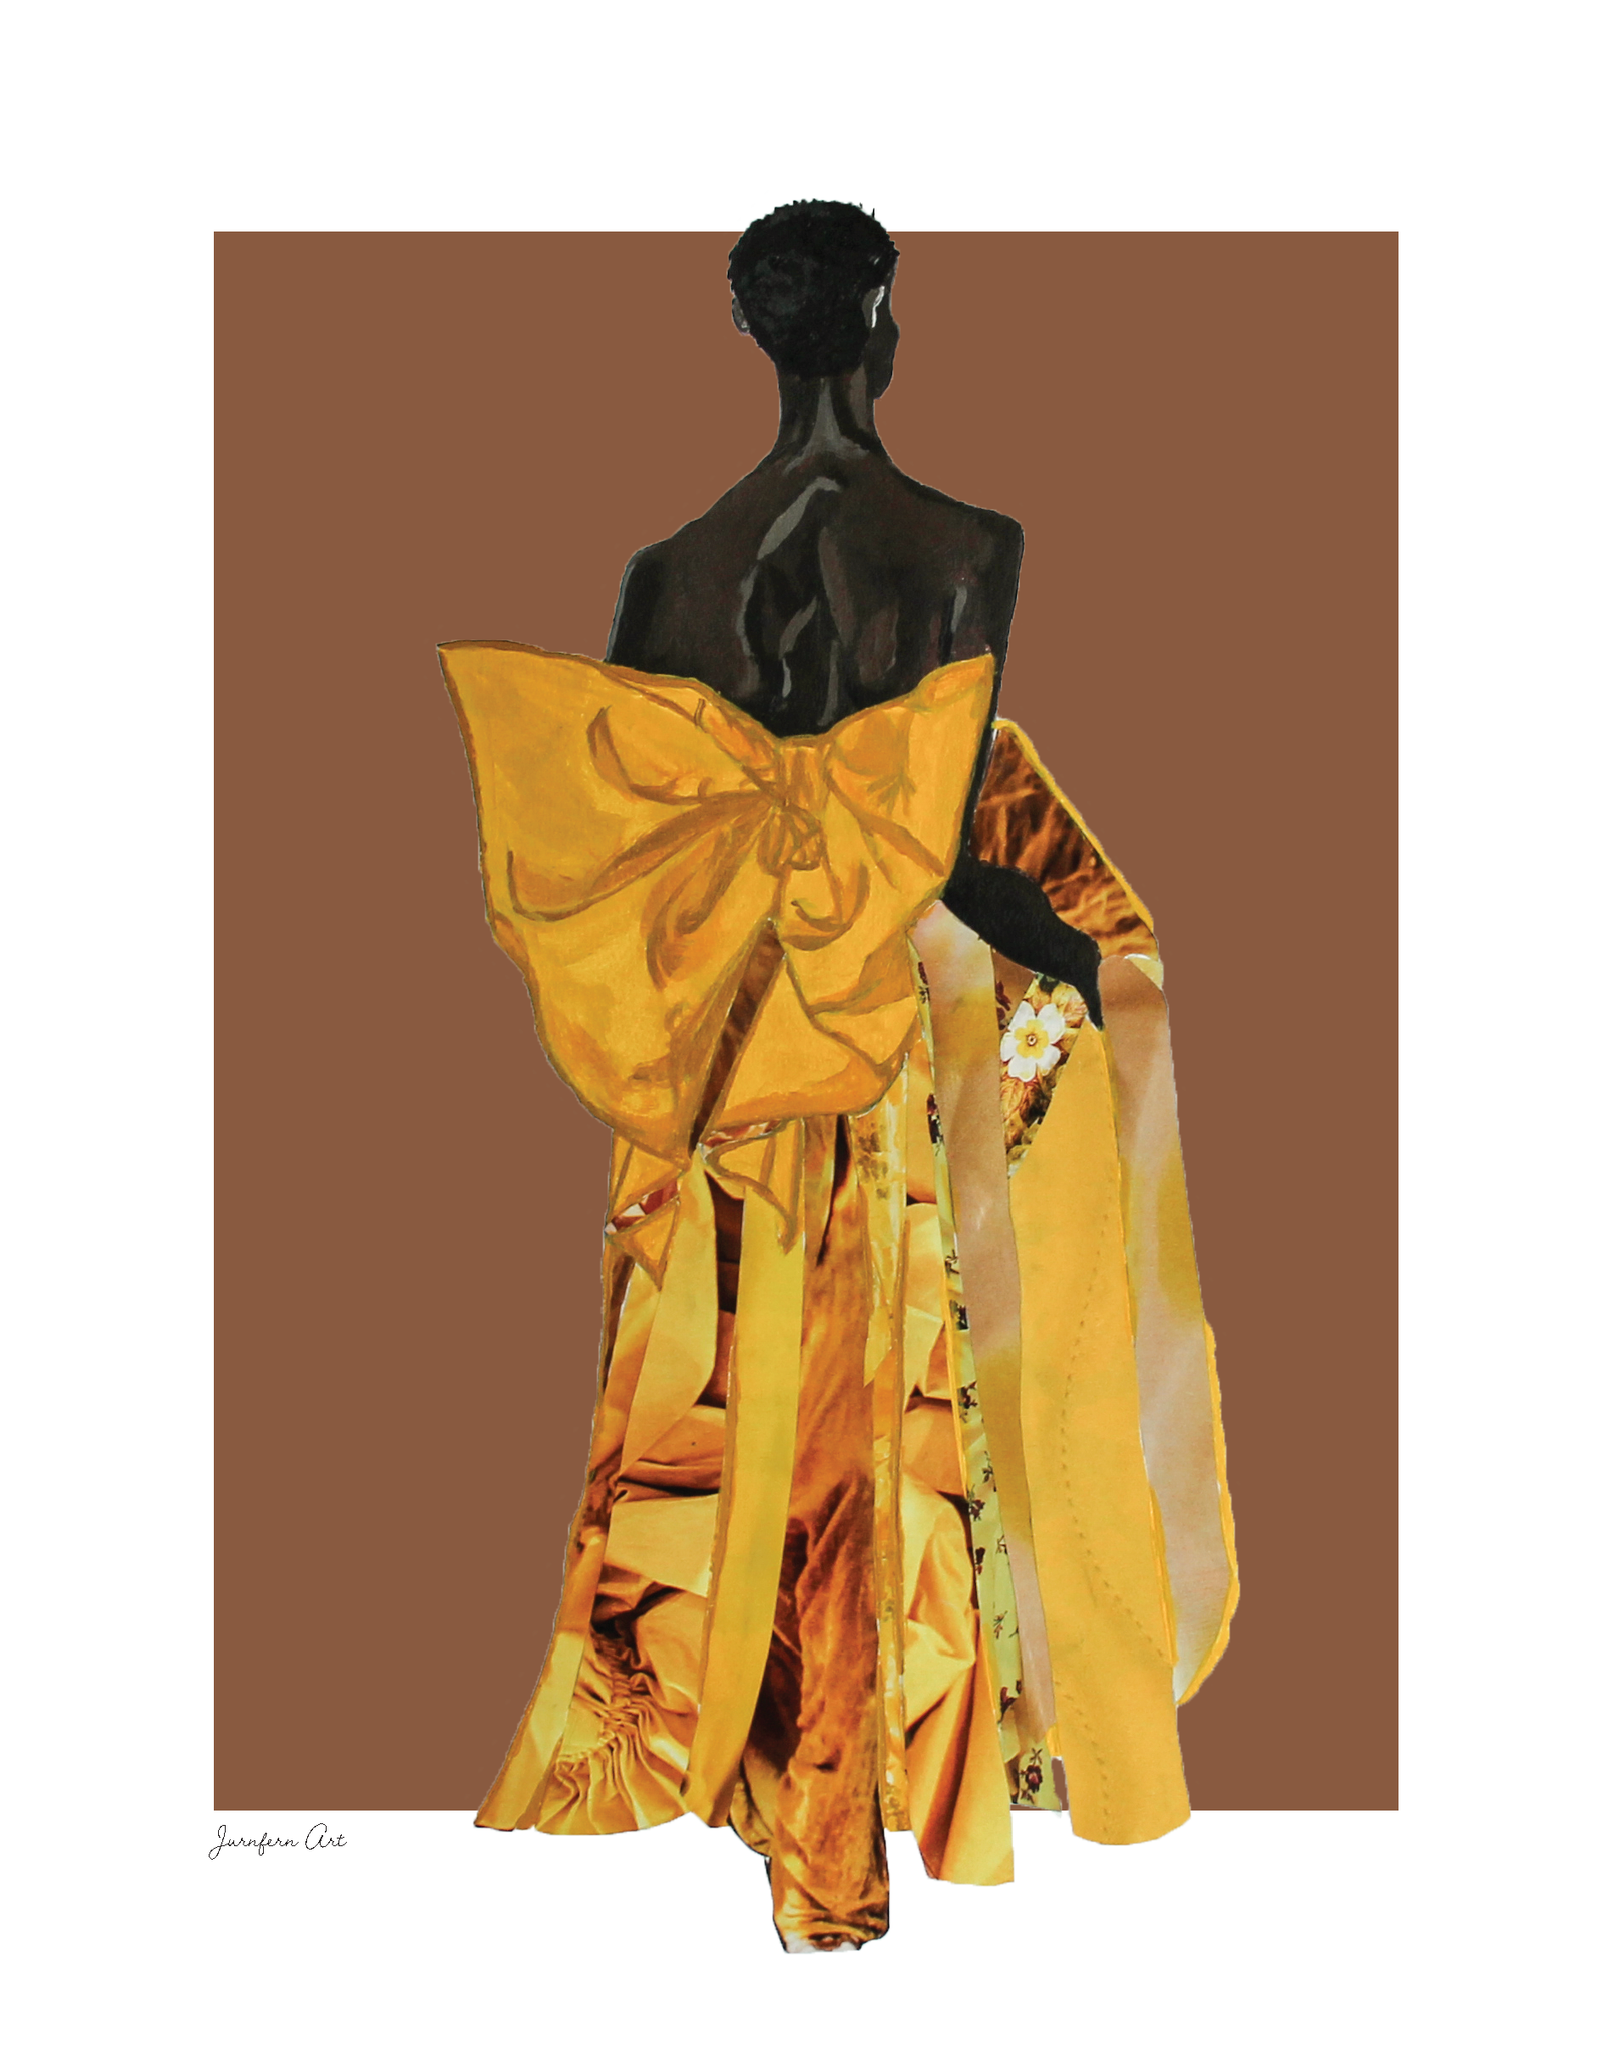 A collage fashion illustration of Black model Akiima Ajak wearing a yellow Valentino gown with a large bow on the back, and a brown background